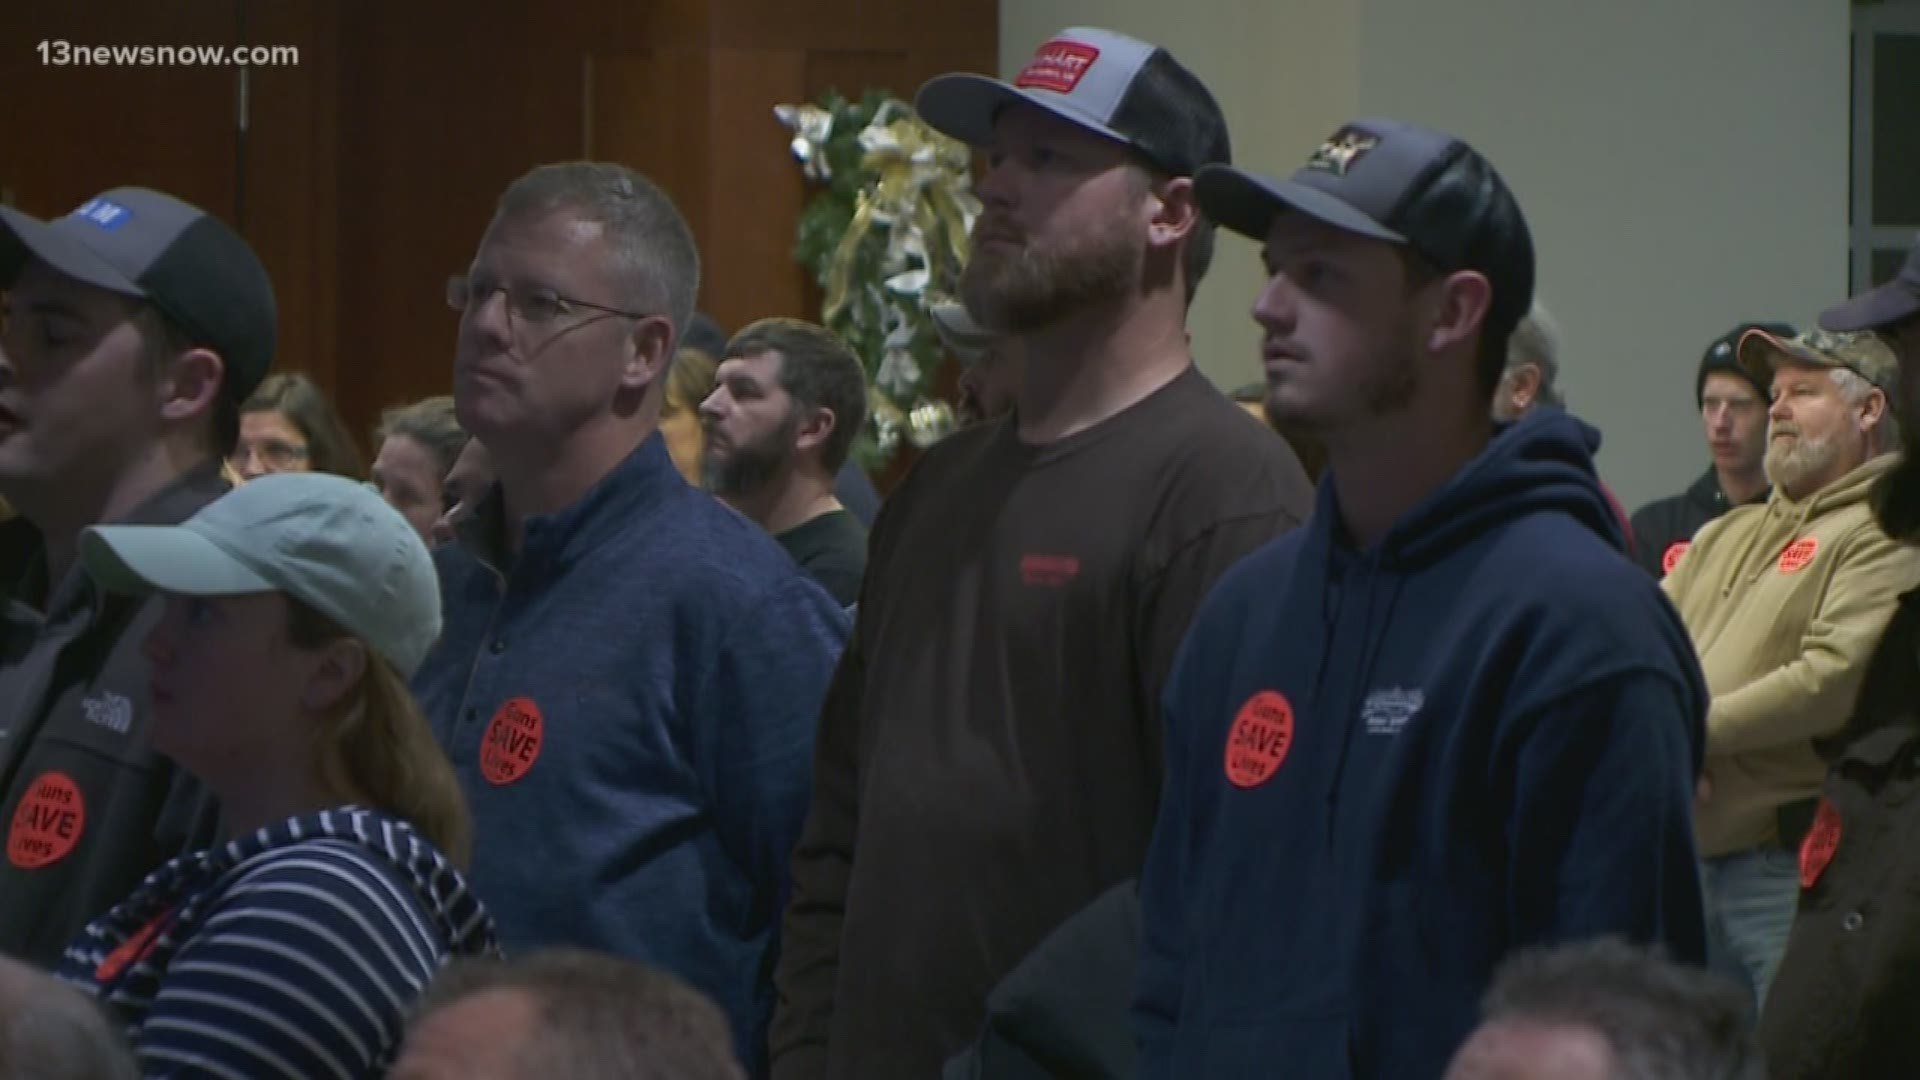 Nearly 600 people gathered at the Suffolk City Council meeting to support the city becoming a Second Amendment Sanctuary. They wore 'Guns SAVE Lives' stickers.